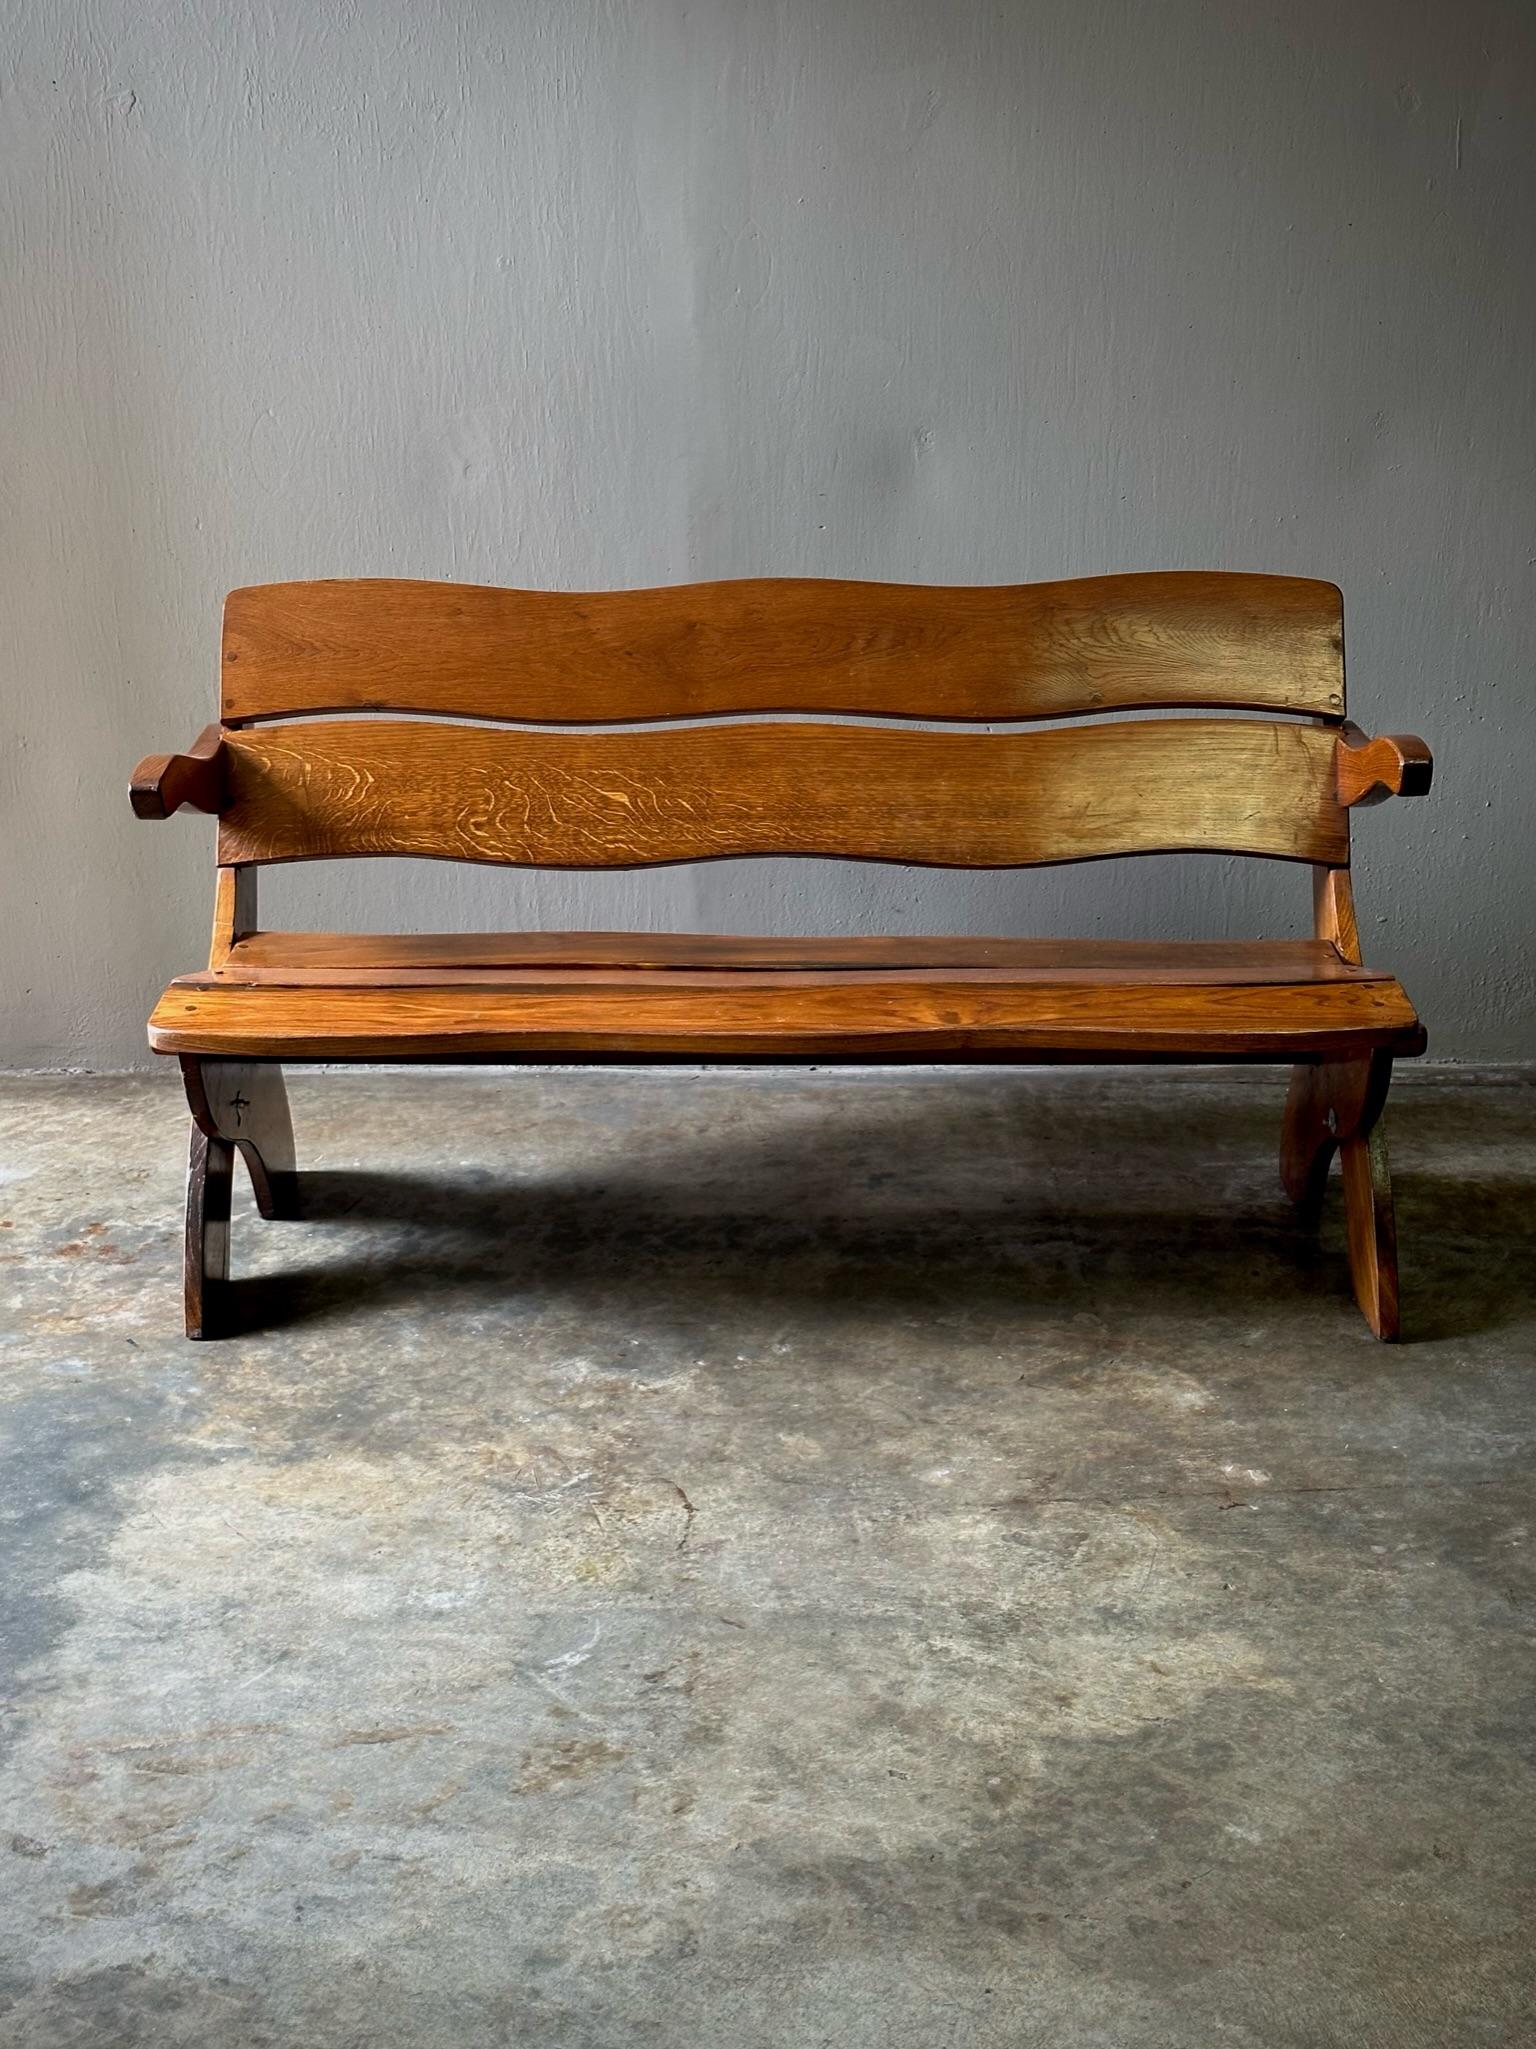 Arts and Crafts bench with beautifully detailed joints and organically shaped seat and back.

Netherlands, circa 1960

Dimensions: 55.5W x 23D x 30H (seat height 15)